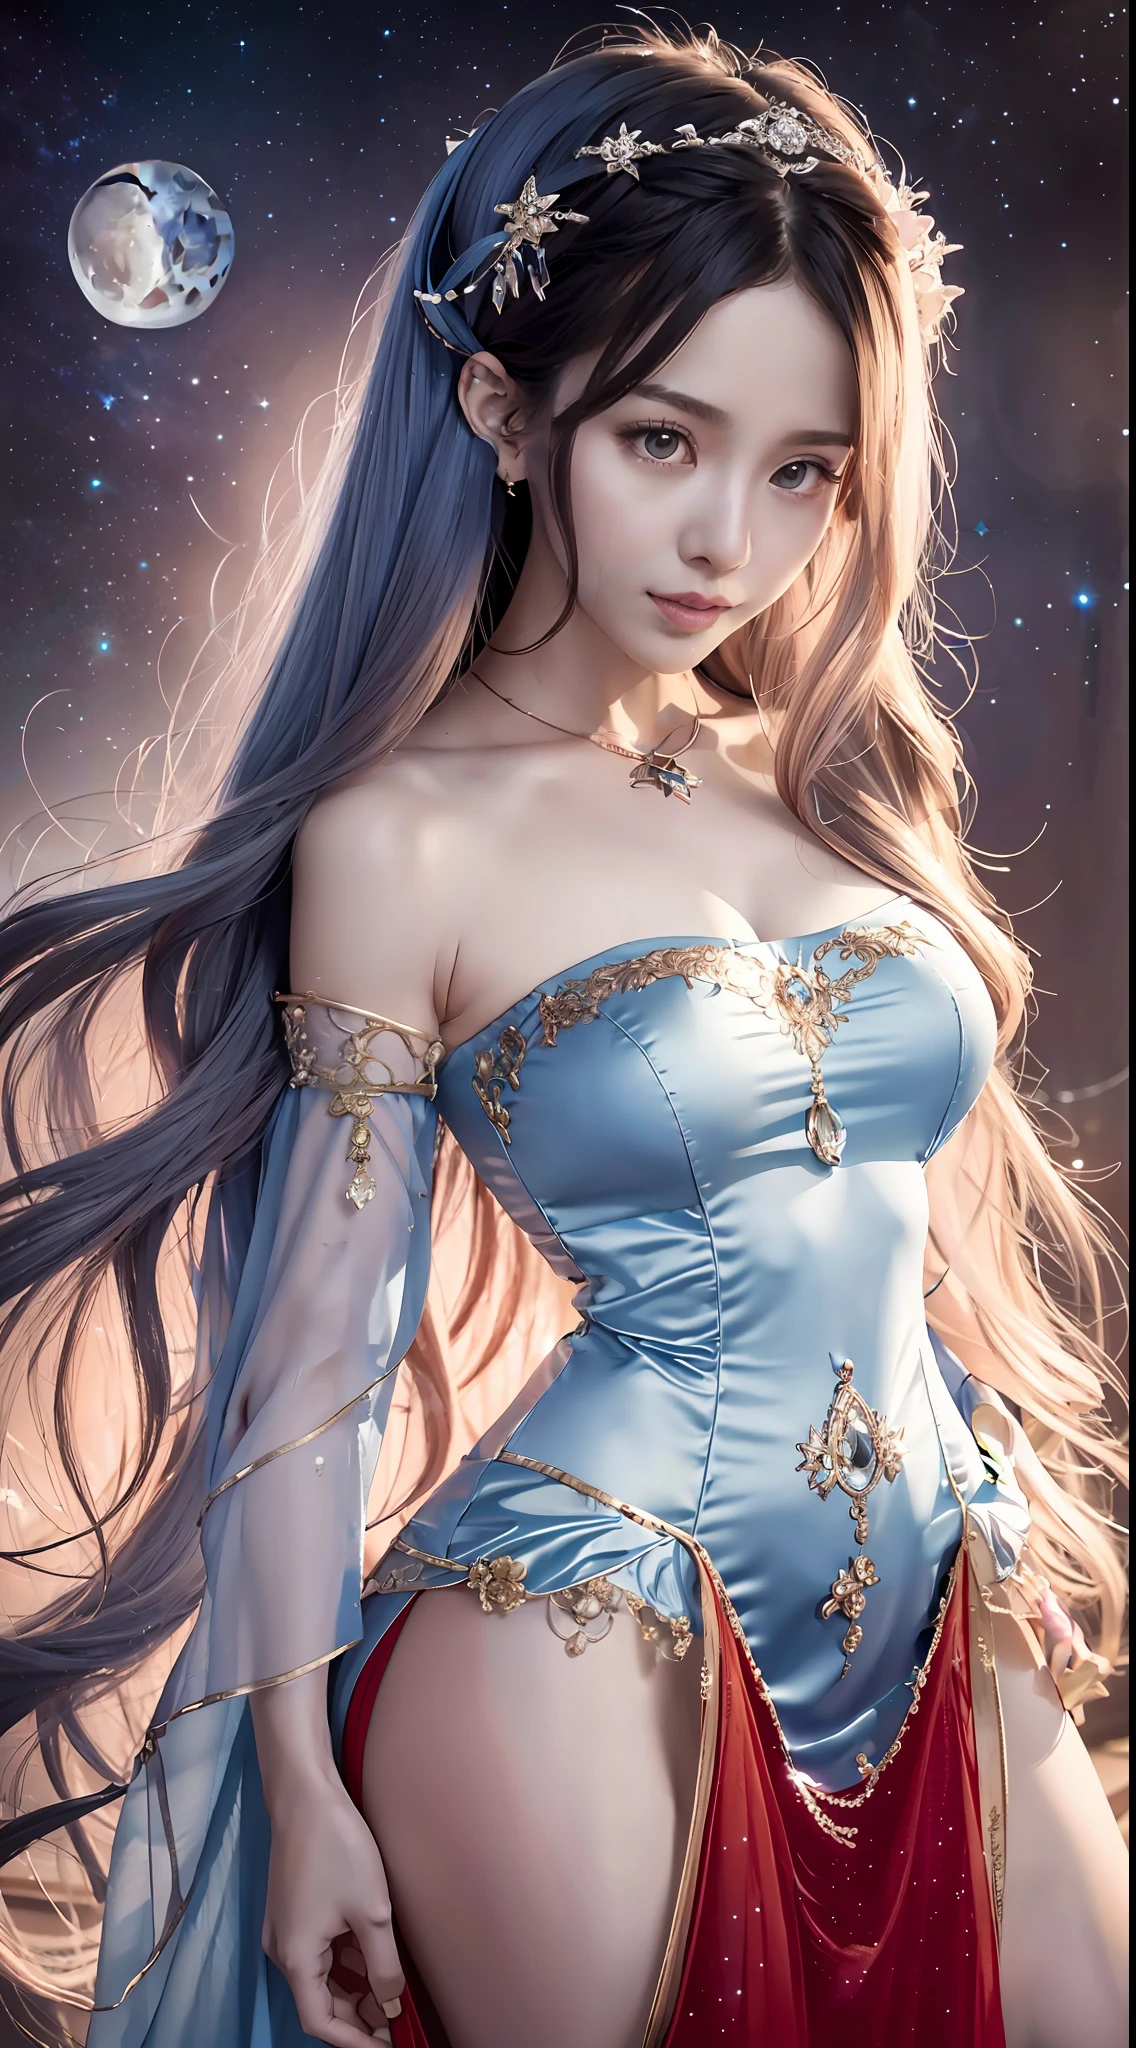 There is a woman in a red dress posing for a photo, moon themed costume, astral witch costume, fantasy costume, live-action girl cosplay, beautiful celestial mage, inspired by cold plum, bandeau dress, popular on cgstation, celestial goddess, April rendering, light blue, dreamy medium portrait top light, light blue skin, amouranth, fantasy dress